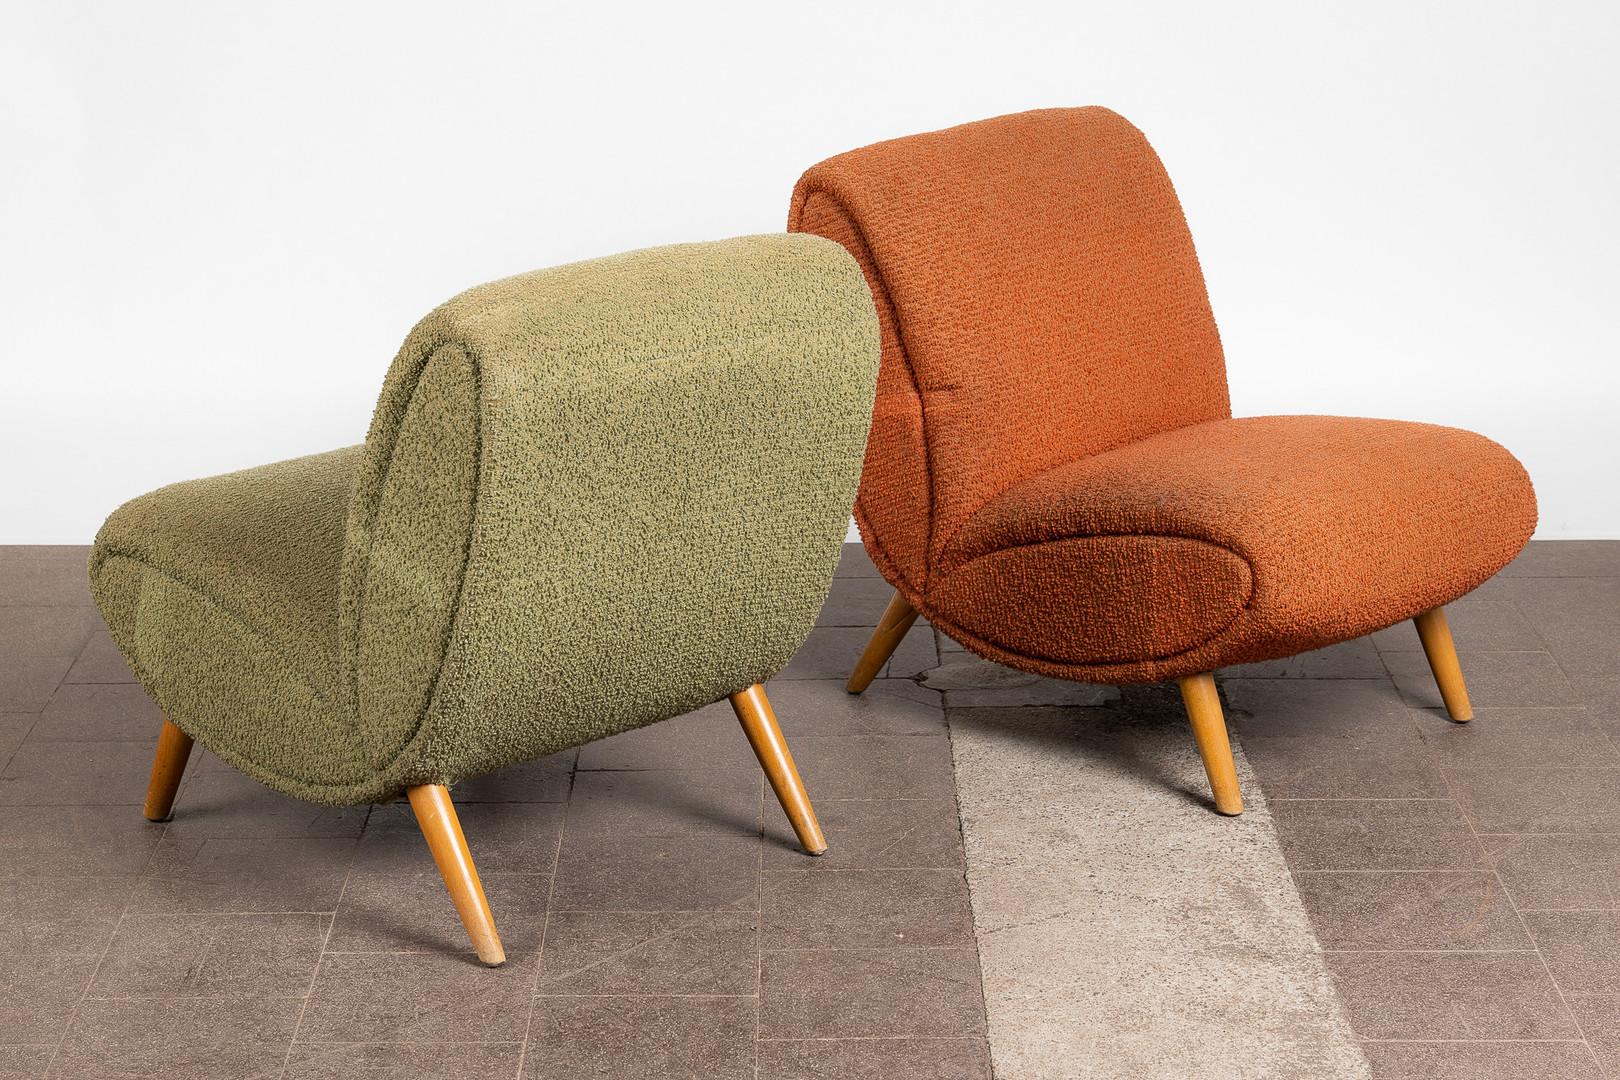 20th Century Pair of Lounge Chairs by Normann Bel Geddes, Mid-Century Modern, 1949, USA For Sale